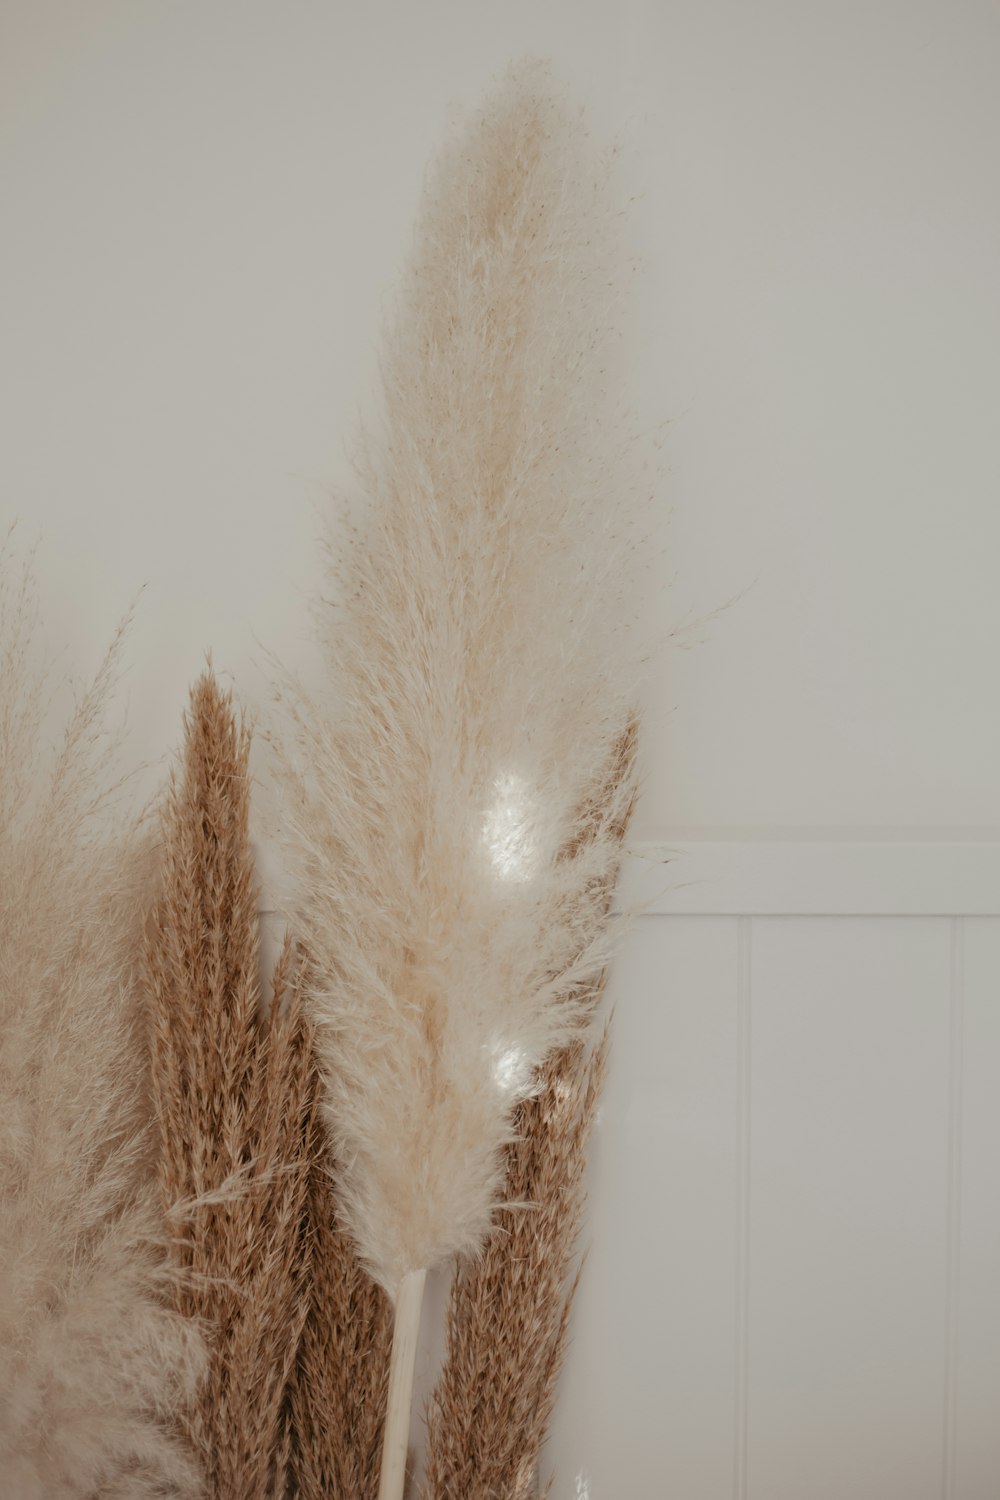 a white wall with some brown and white feathers